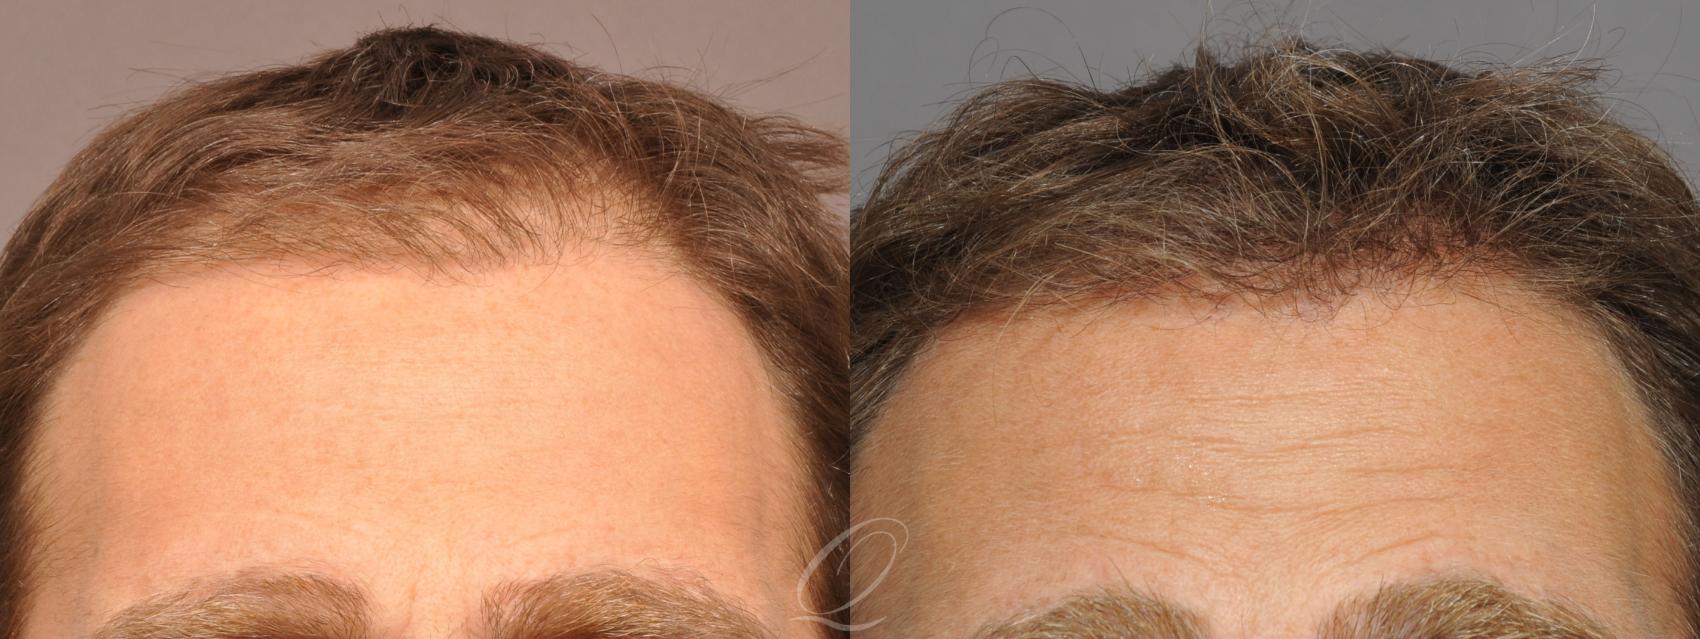 FUT Case 1042 Before & After View #1 | Rochester, Buffalo, & Syracuse, NY | Quatela Center for Hair Restoration